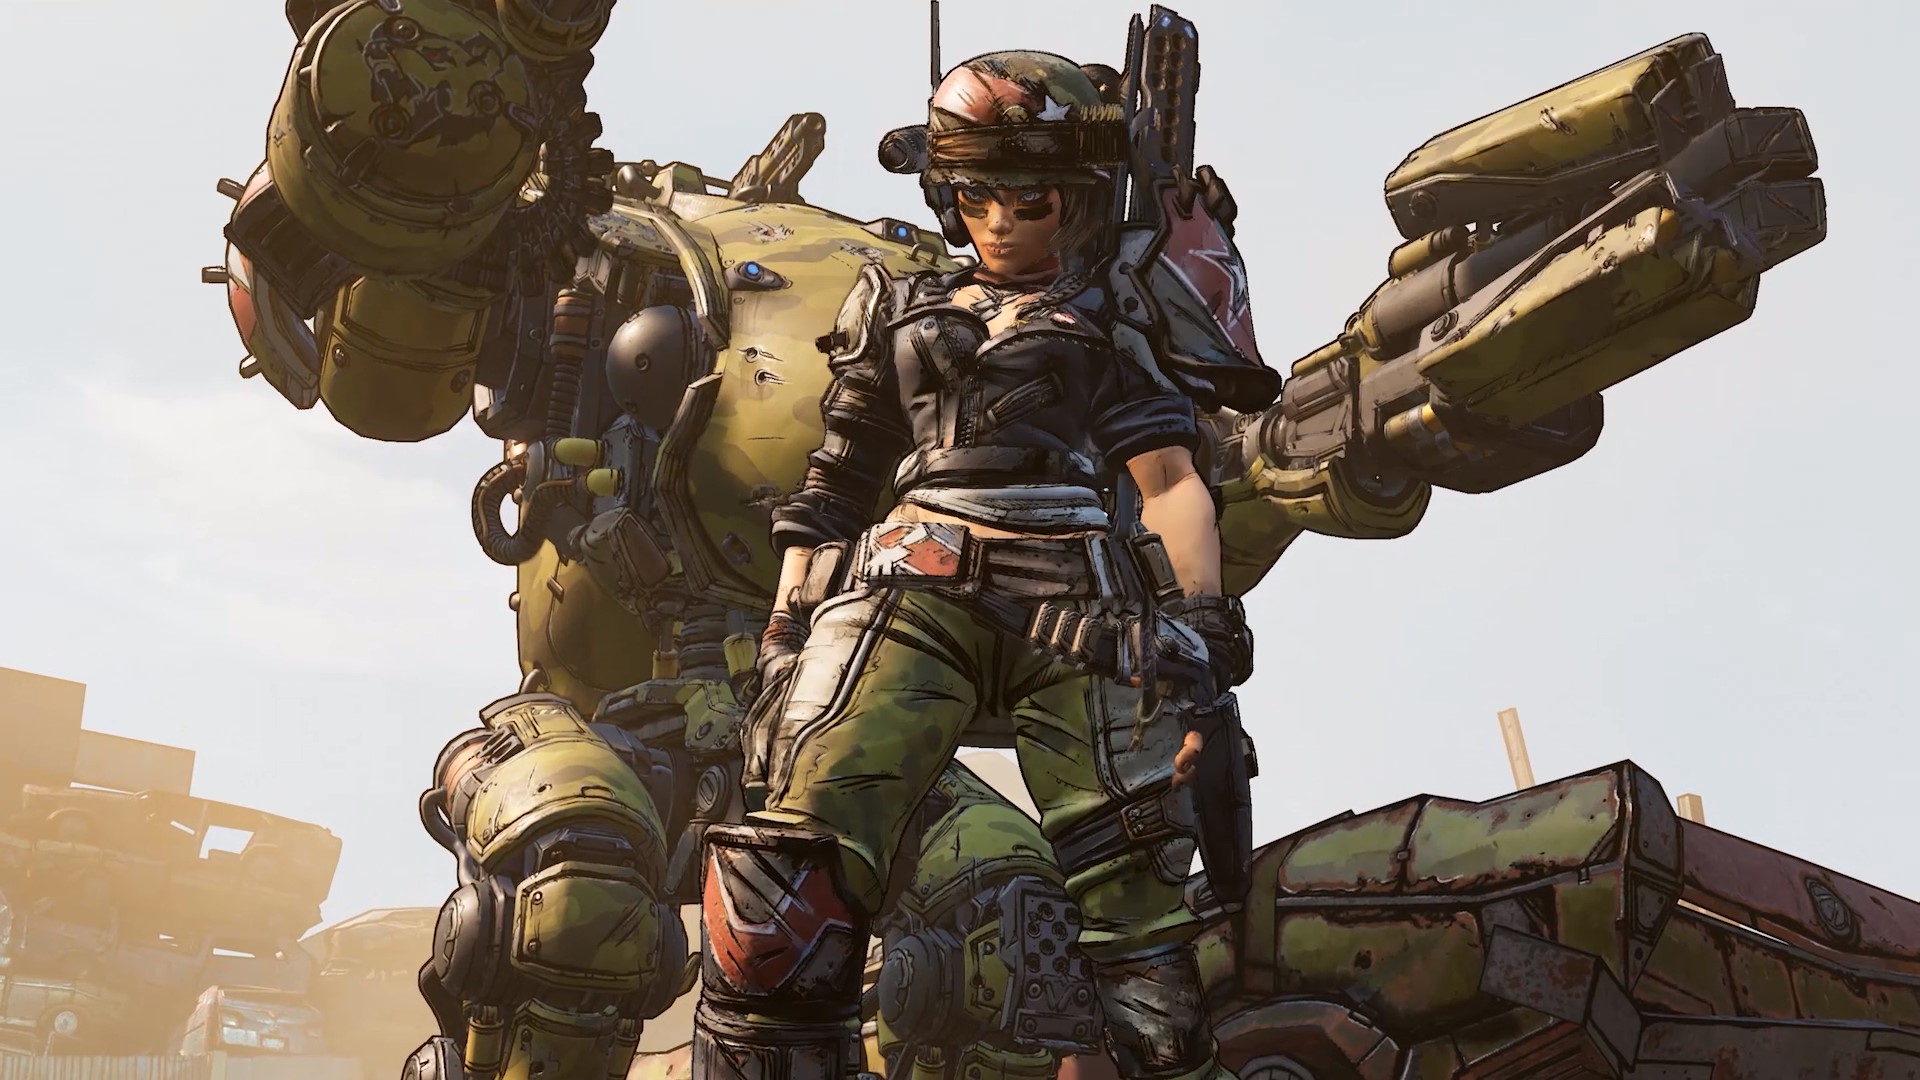 One of Borderlands 3's New Characters with a Mech! 